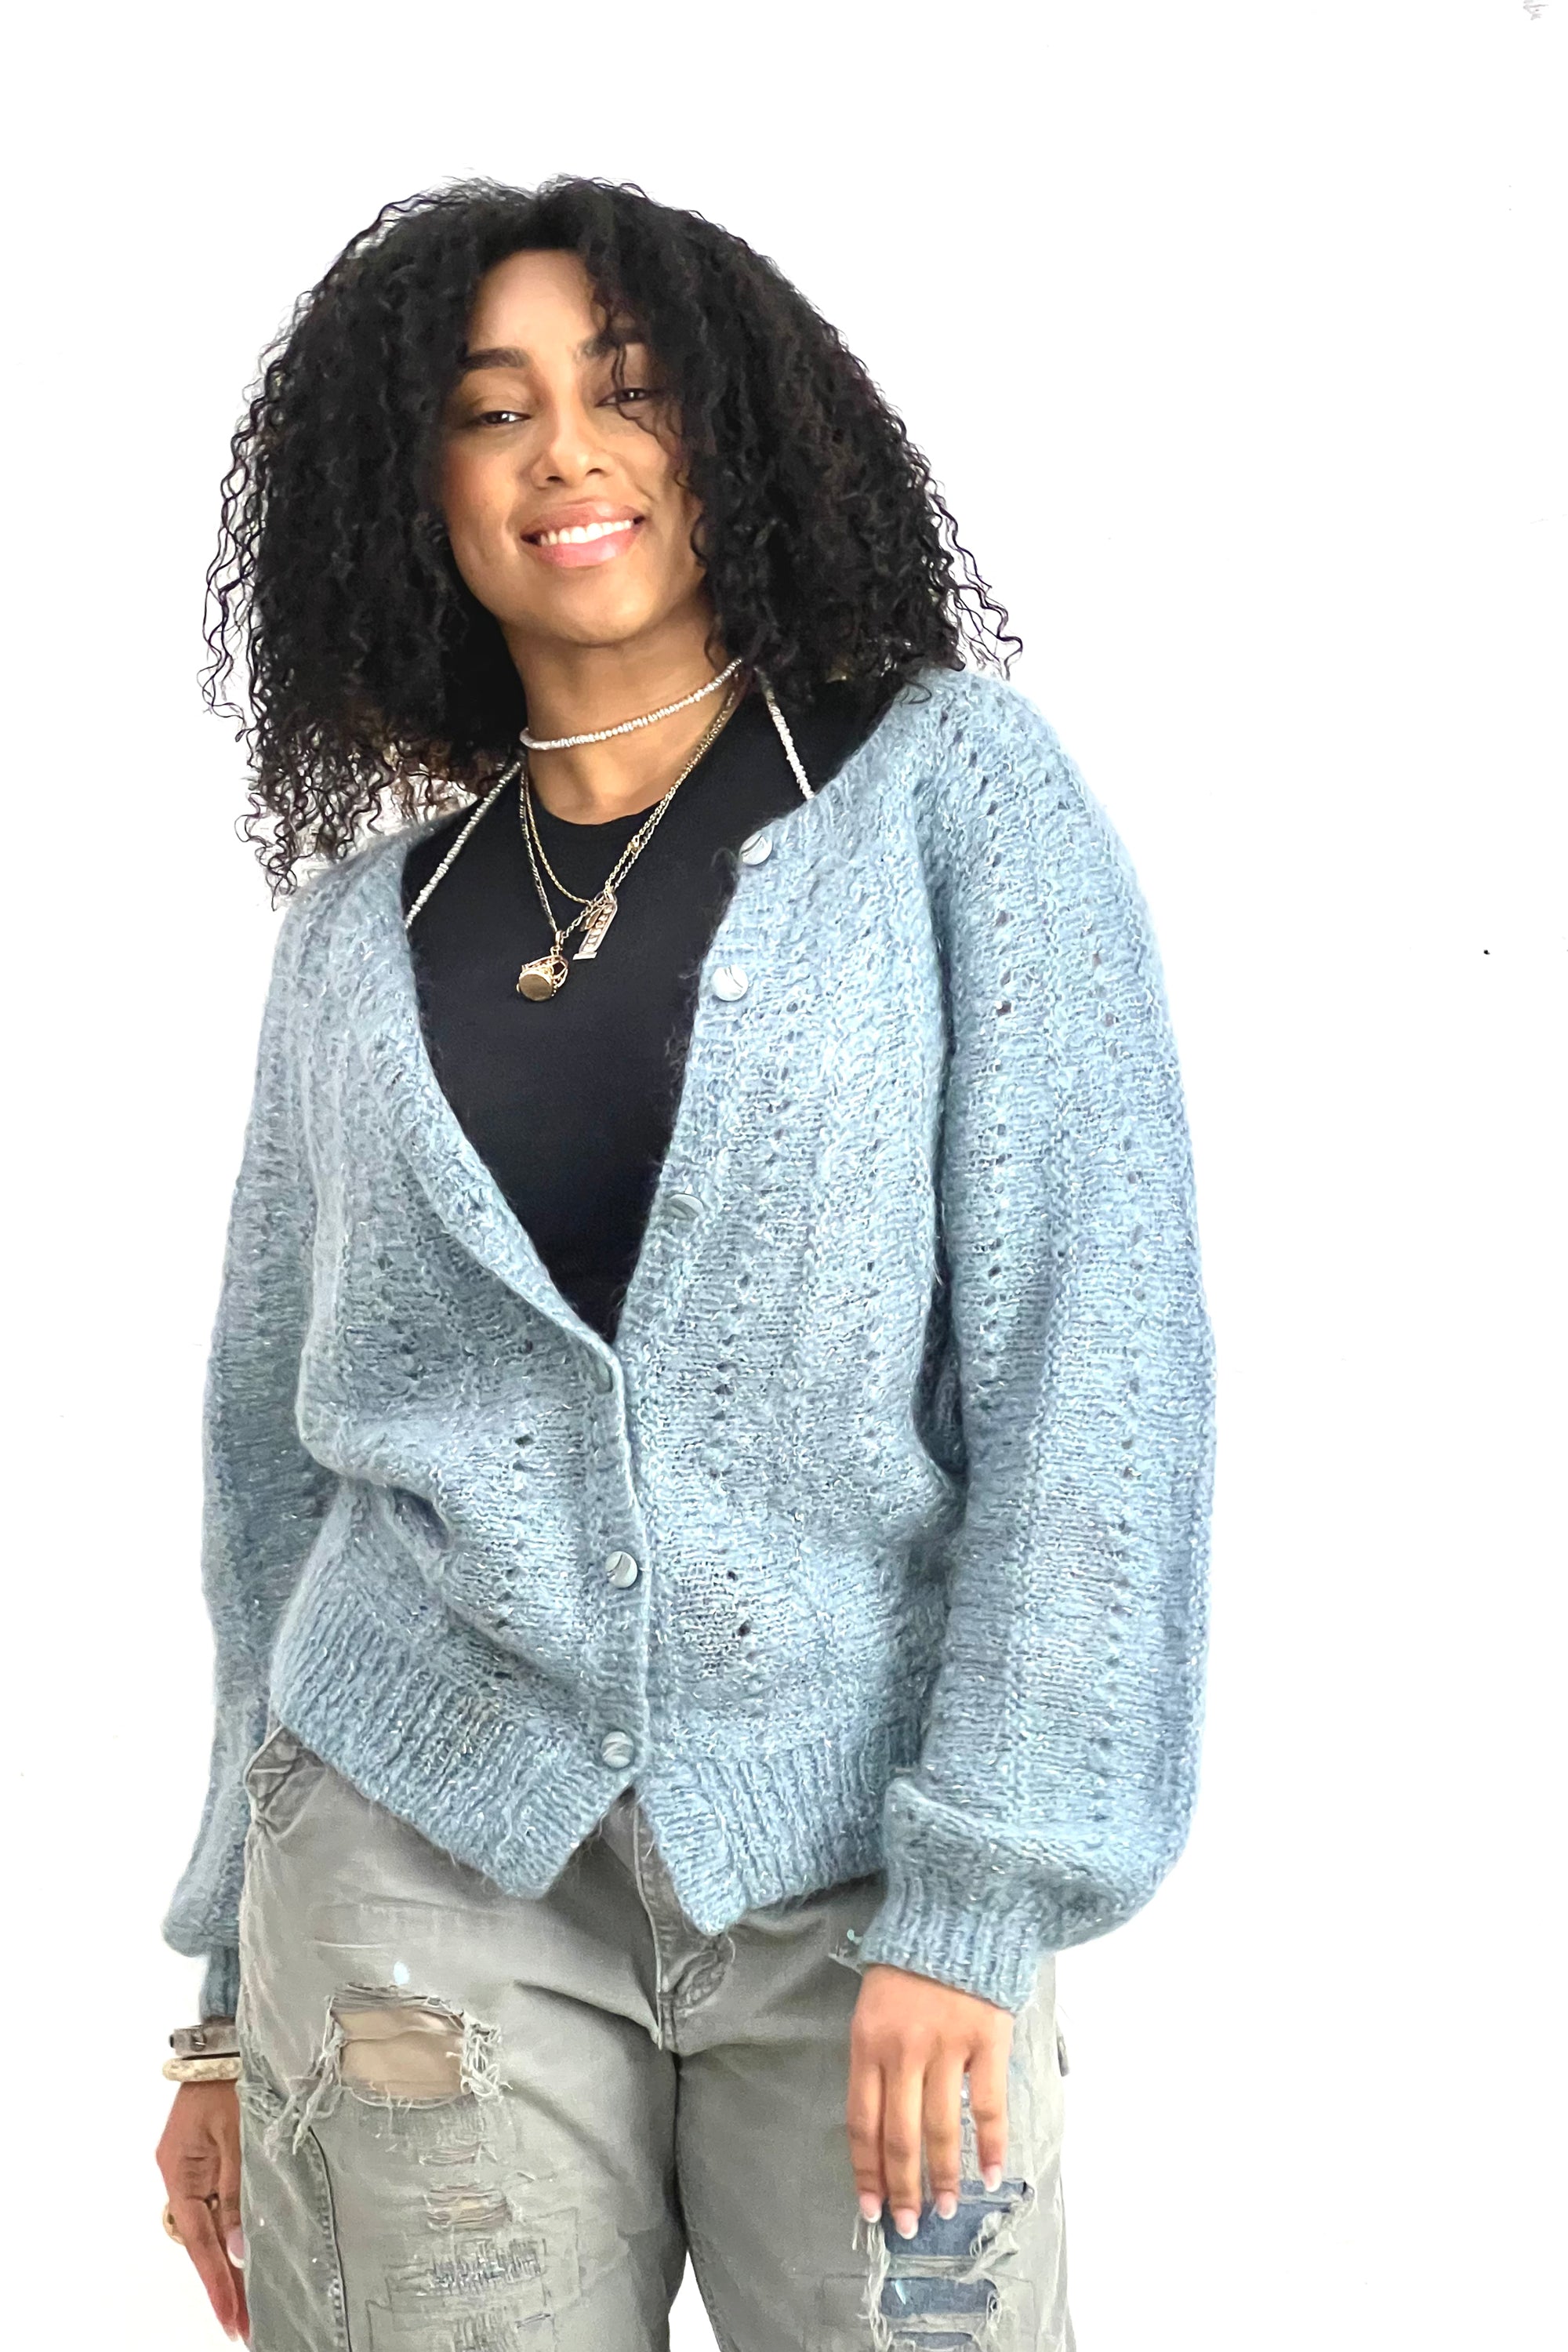 Vintage Hand Knit Sky Sparkle Cardi Selected by Anna Corinna